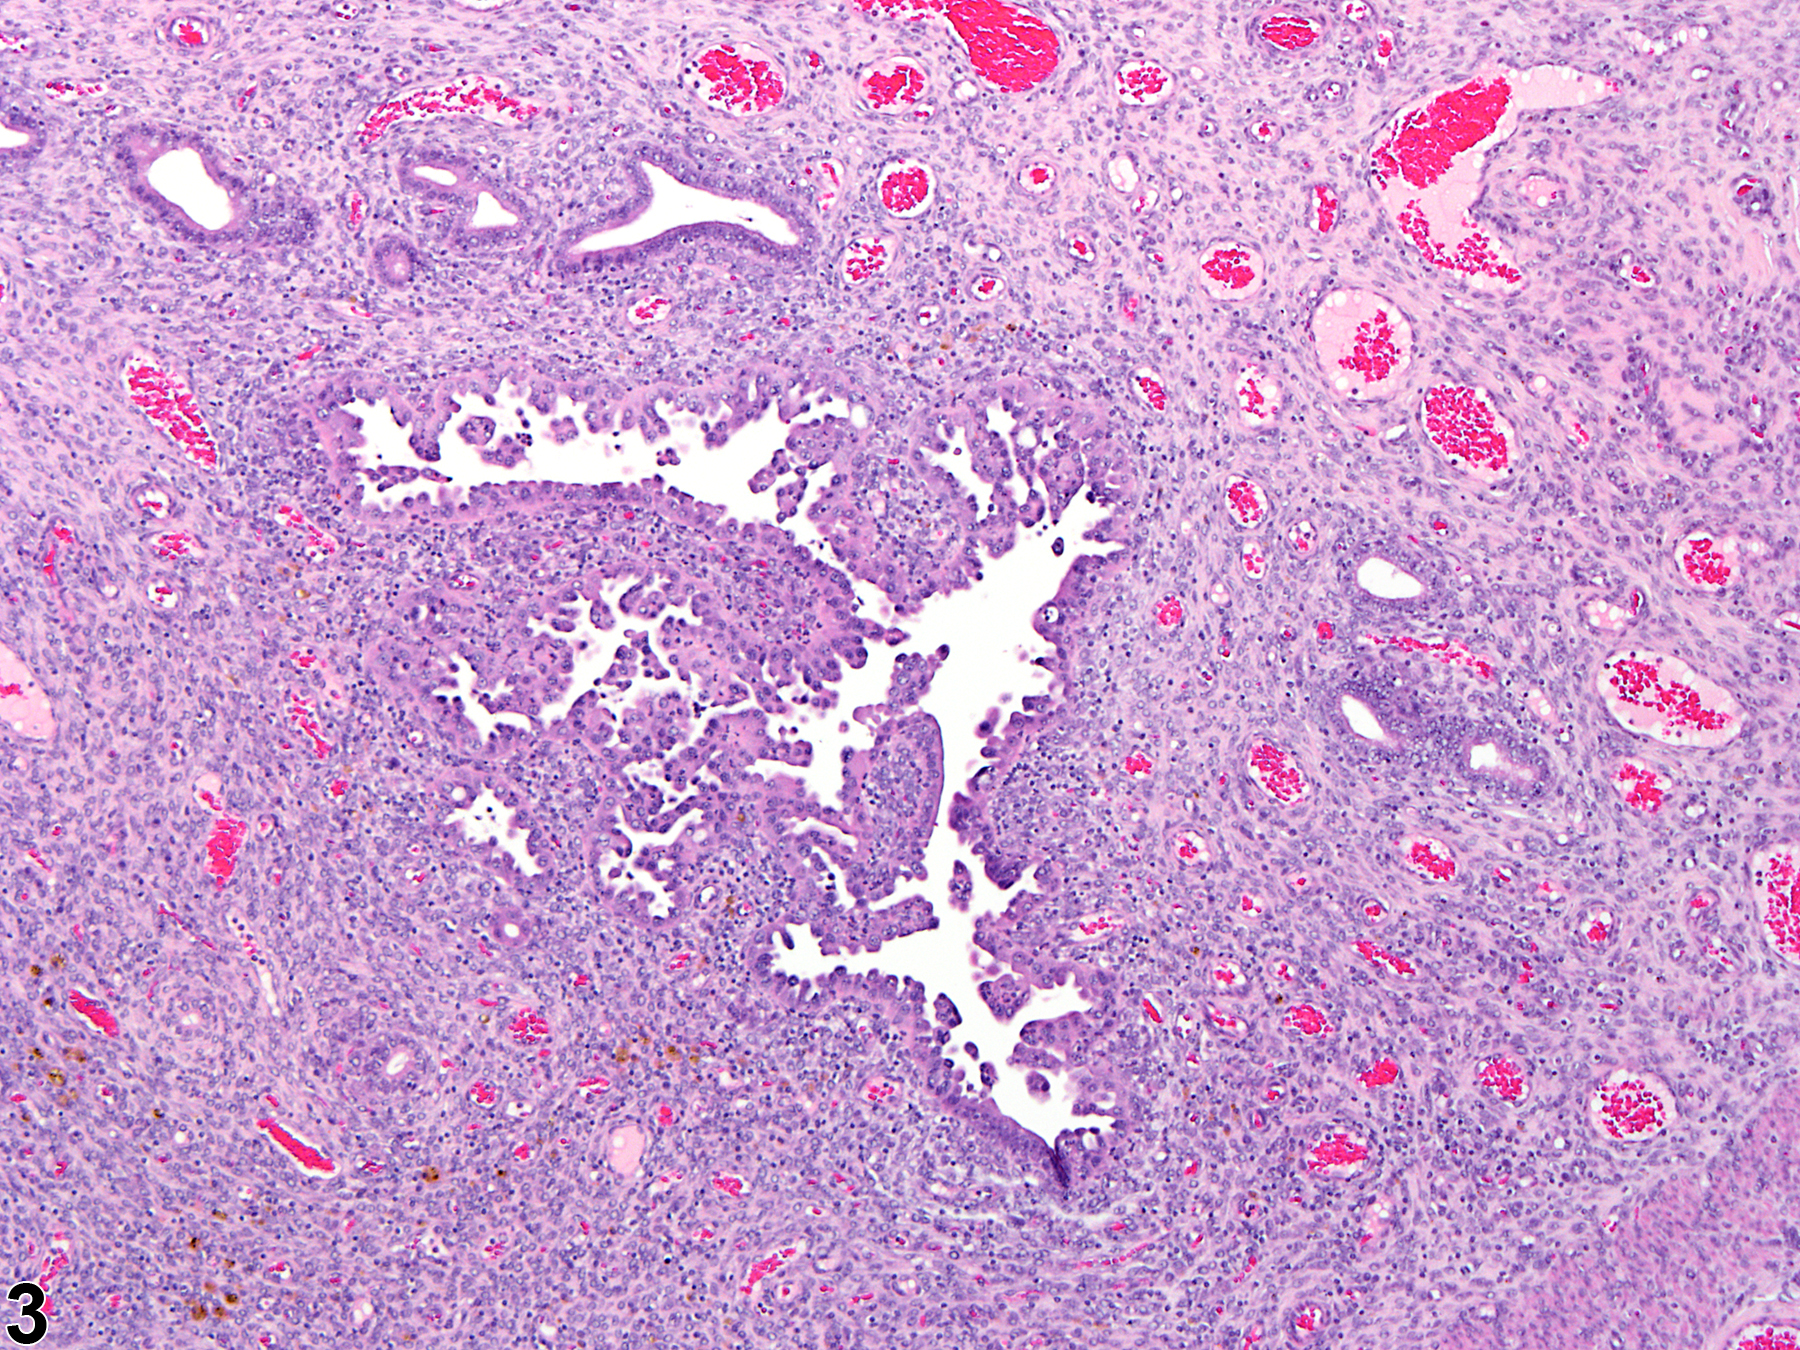 Image of hyperplasia, atypical in the uterus from a female Wistar Han rat in a chronic study